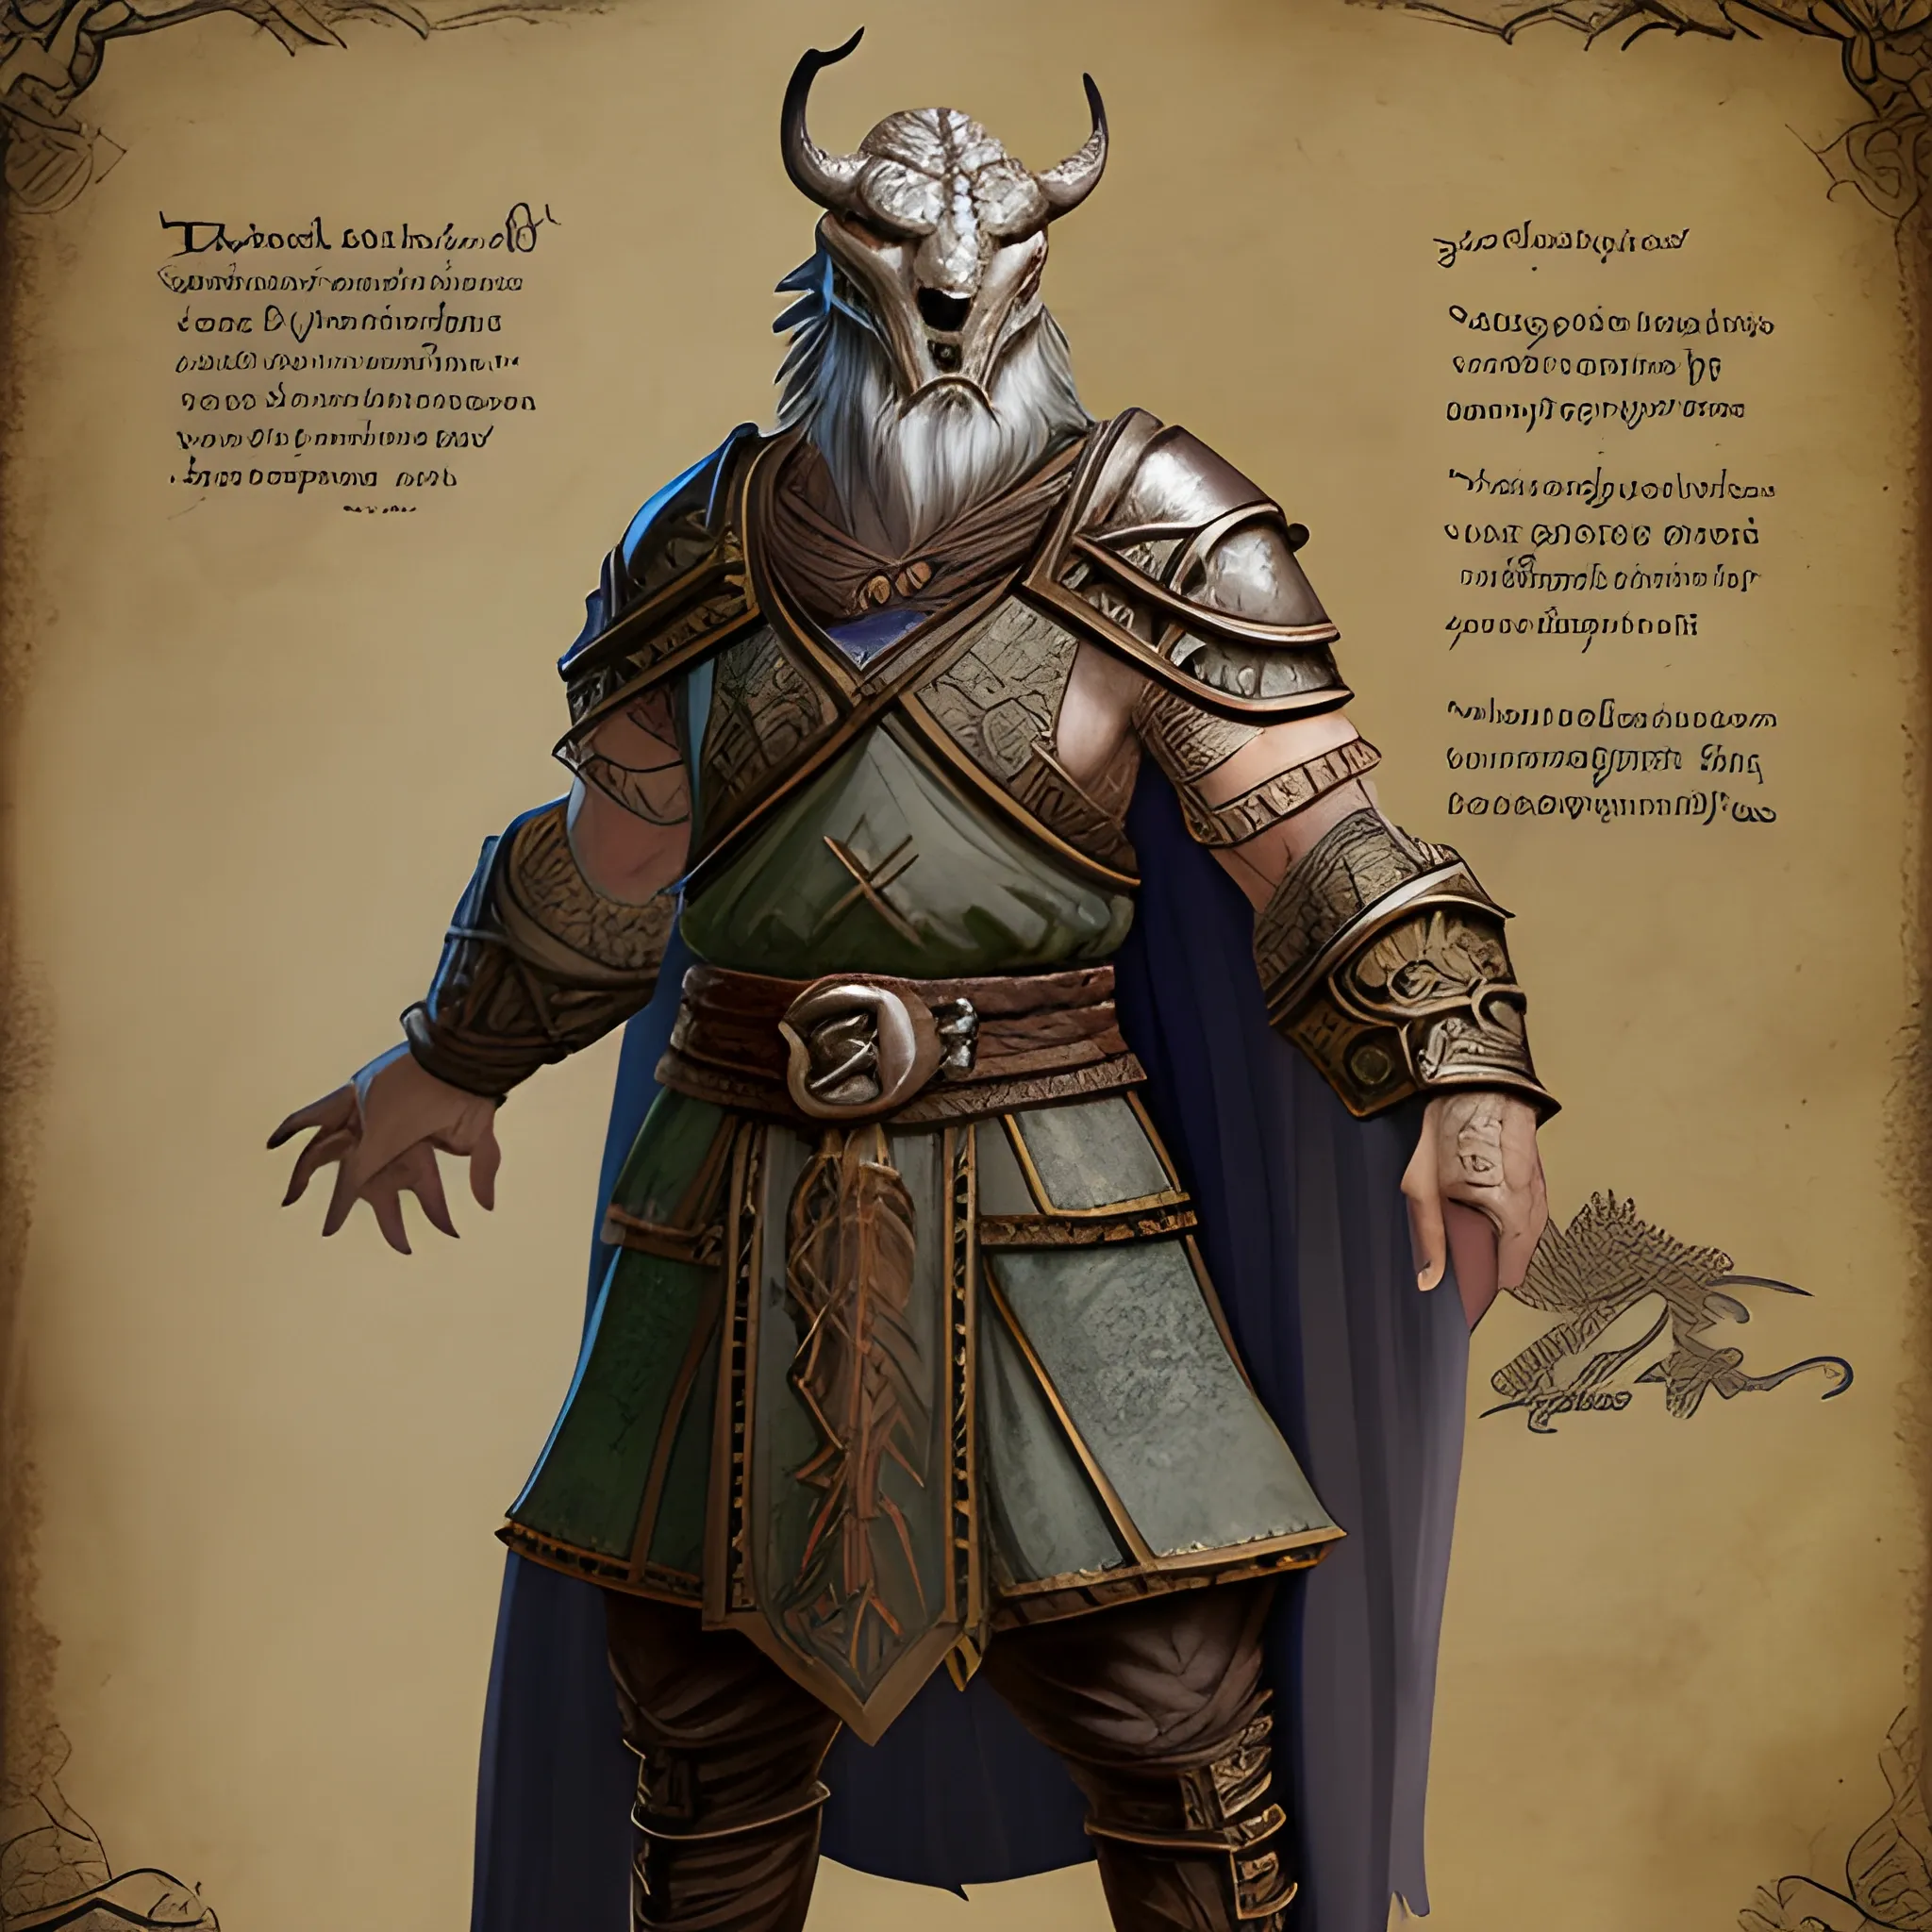 Aldric the Elder: Aldric, an aged dragonborn, is the village's wise elder, a repository of history and knowledge. His scales bear the marks of a long life, and his stories impart valuable lessons and wisdom to the younger generations.